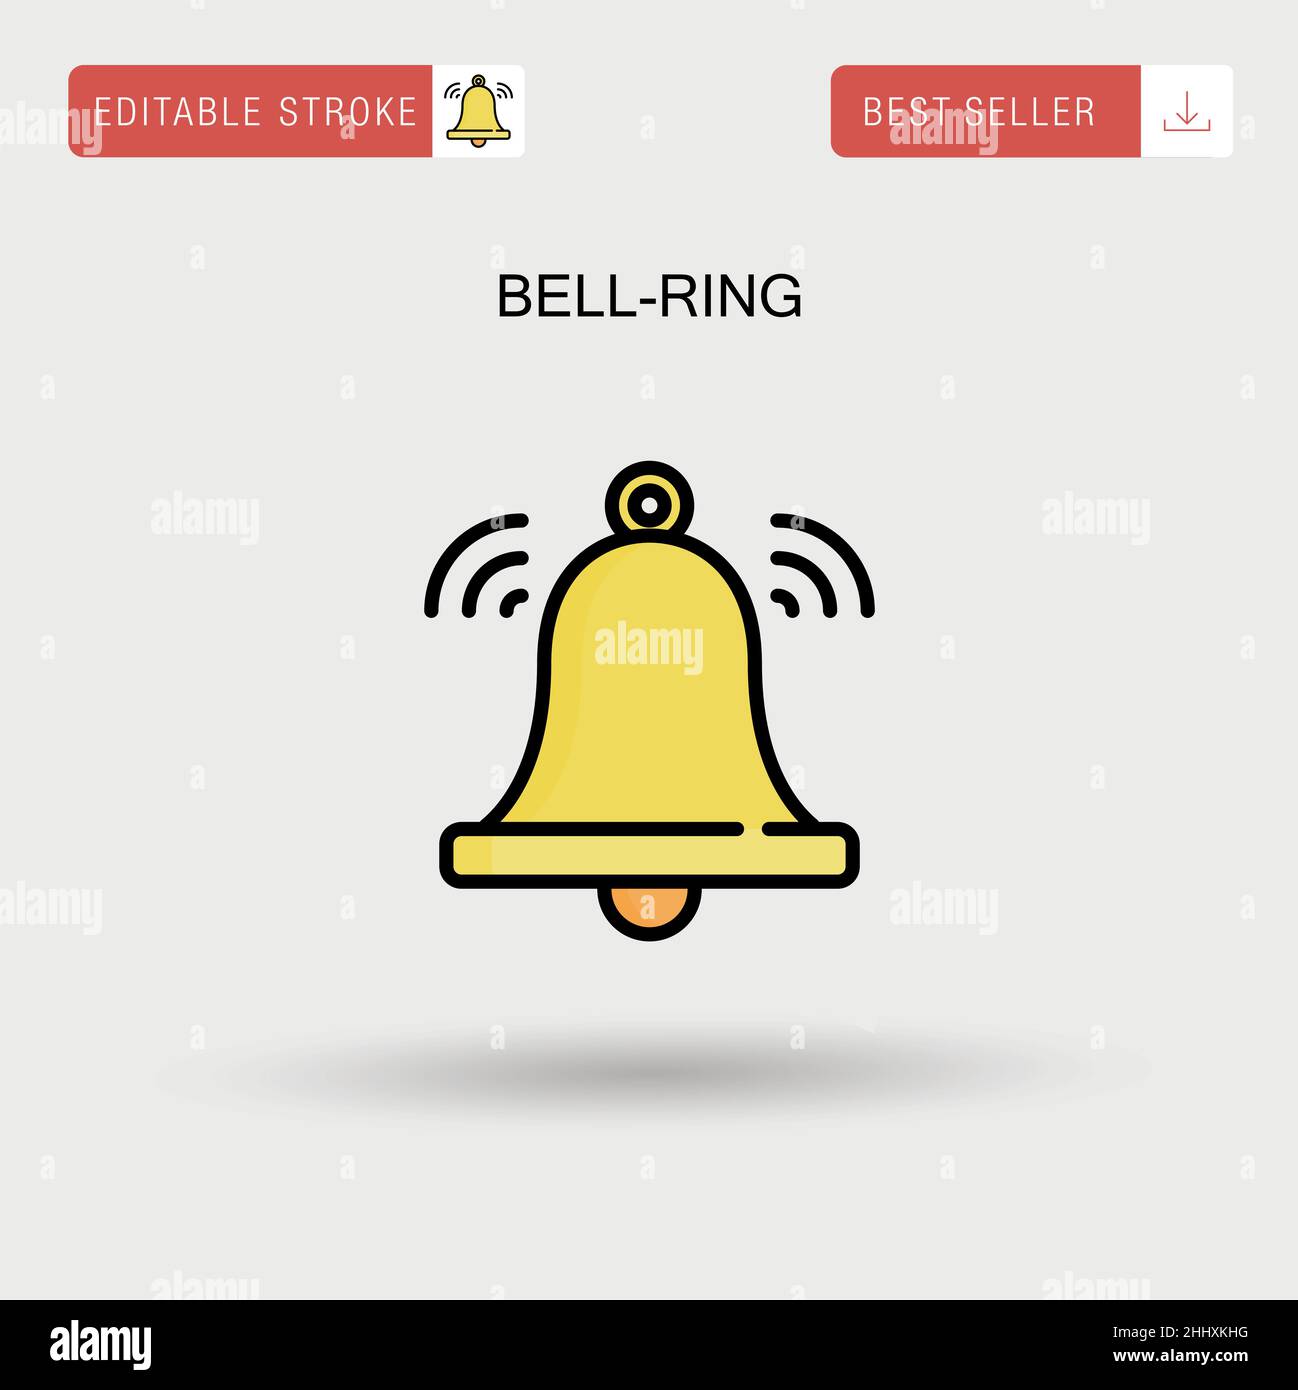 Make the bell ring Stock Vector Images - Alamy